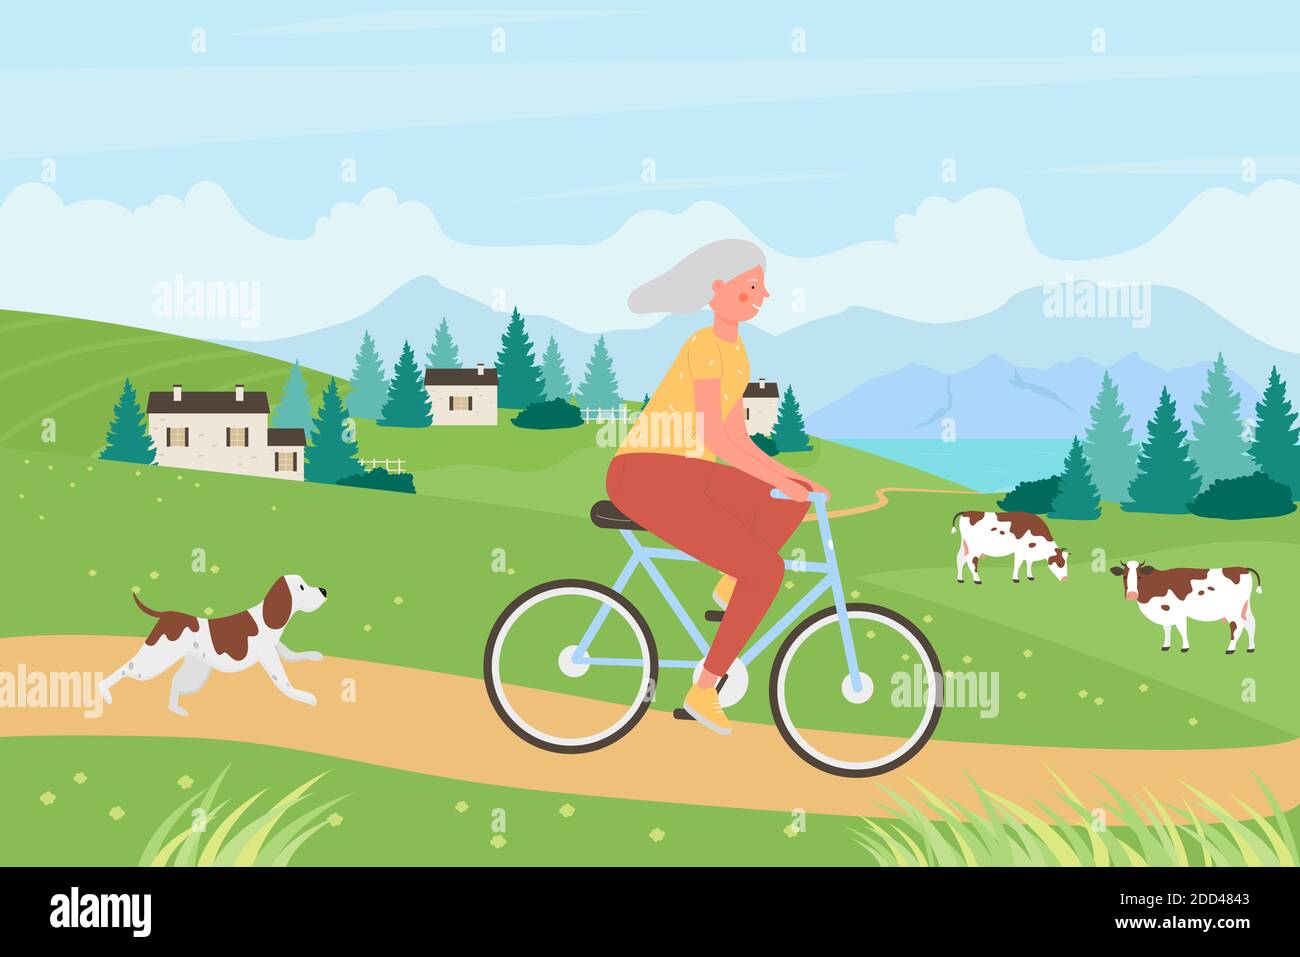 Healthy active lifestyle for senior people vector illustration. Cartoon old woman cyclist character riding bicycle bike, older rider lady cycling on rural road in summer village landscape background Stock Vector